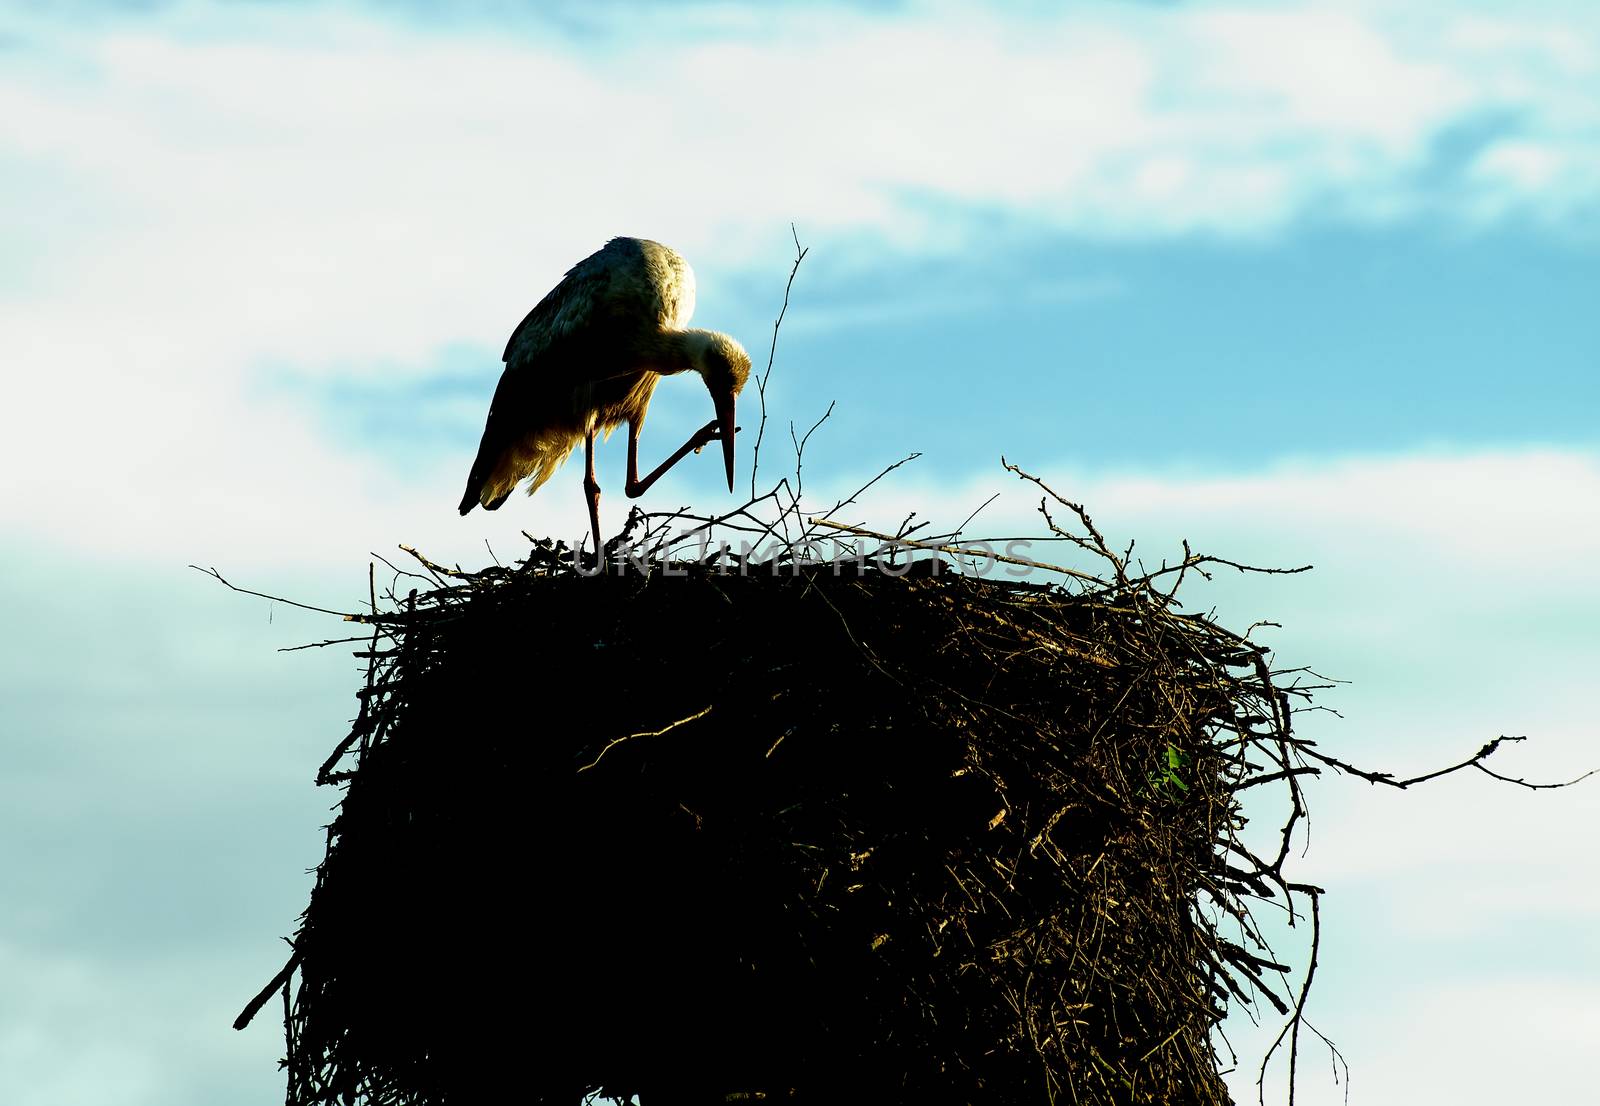 White Stork Stand at One Leg and Scratching Beak with Other Leg in His Nest Outdoors